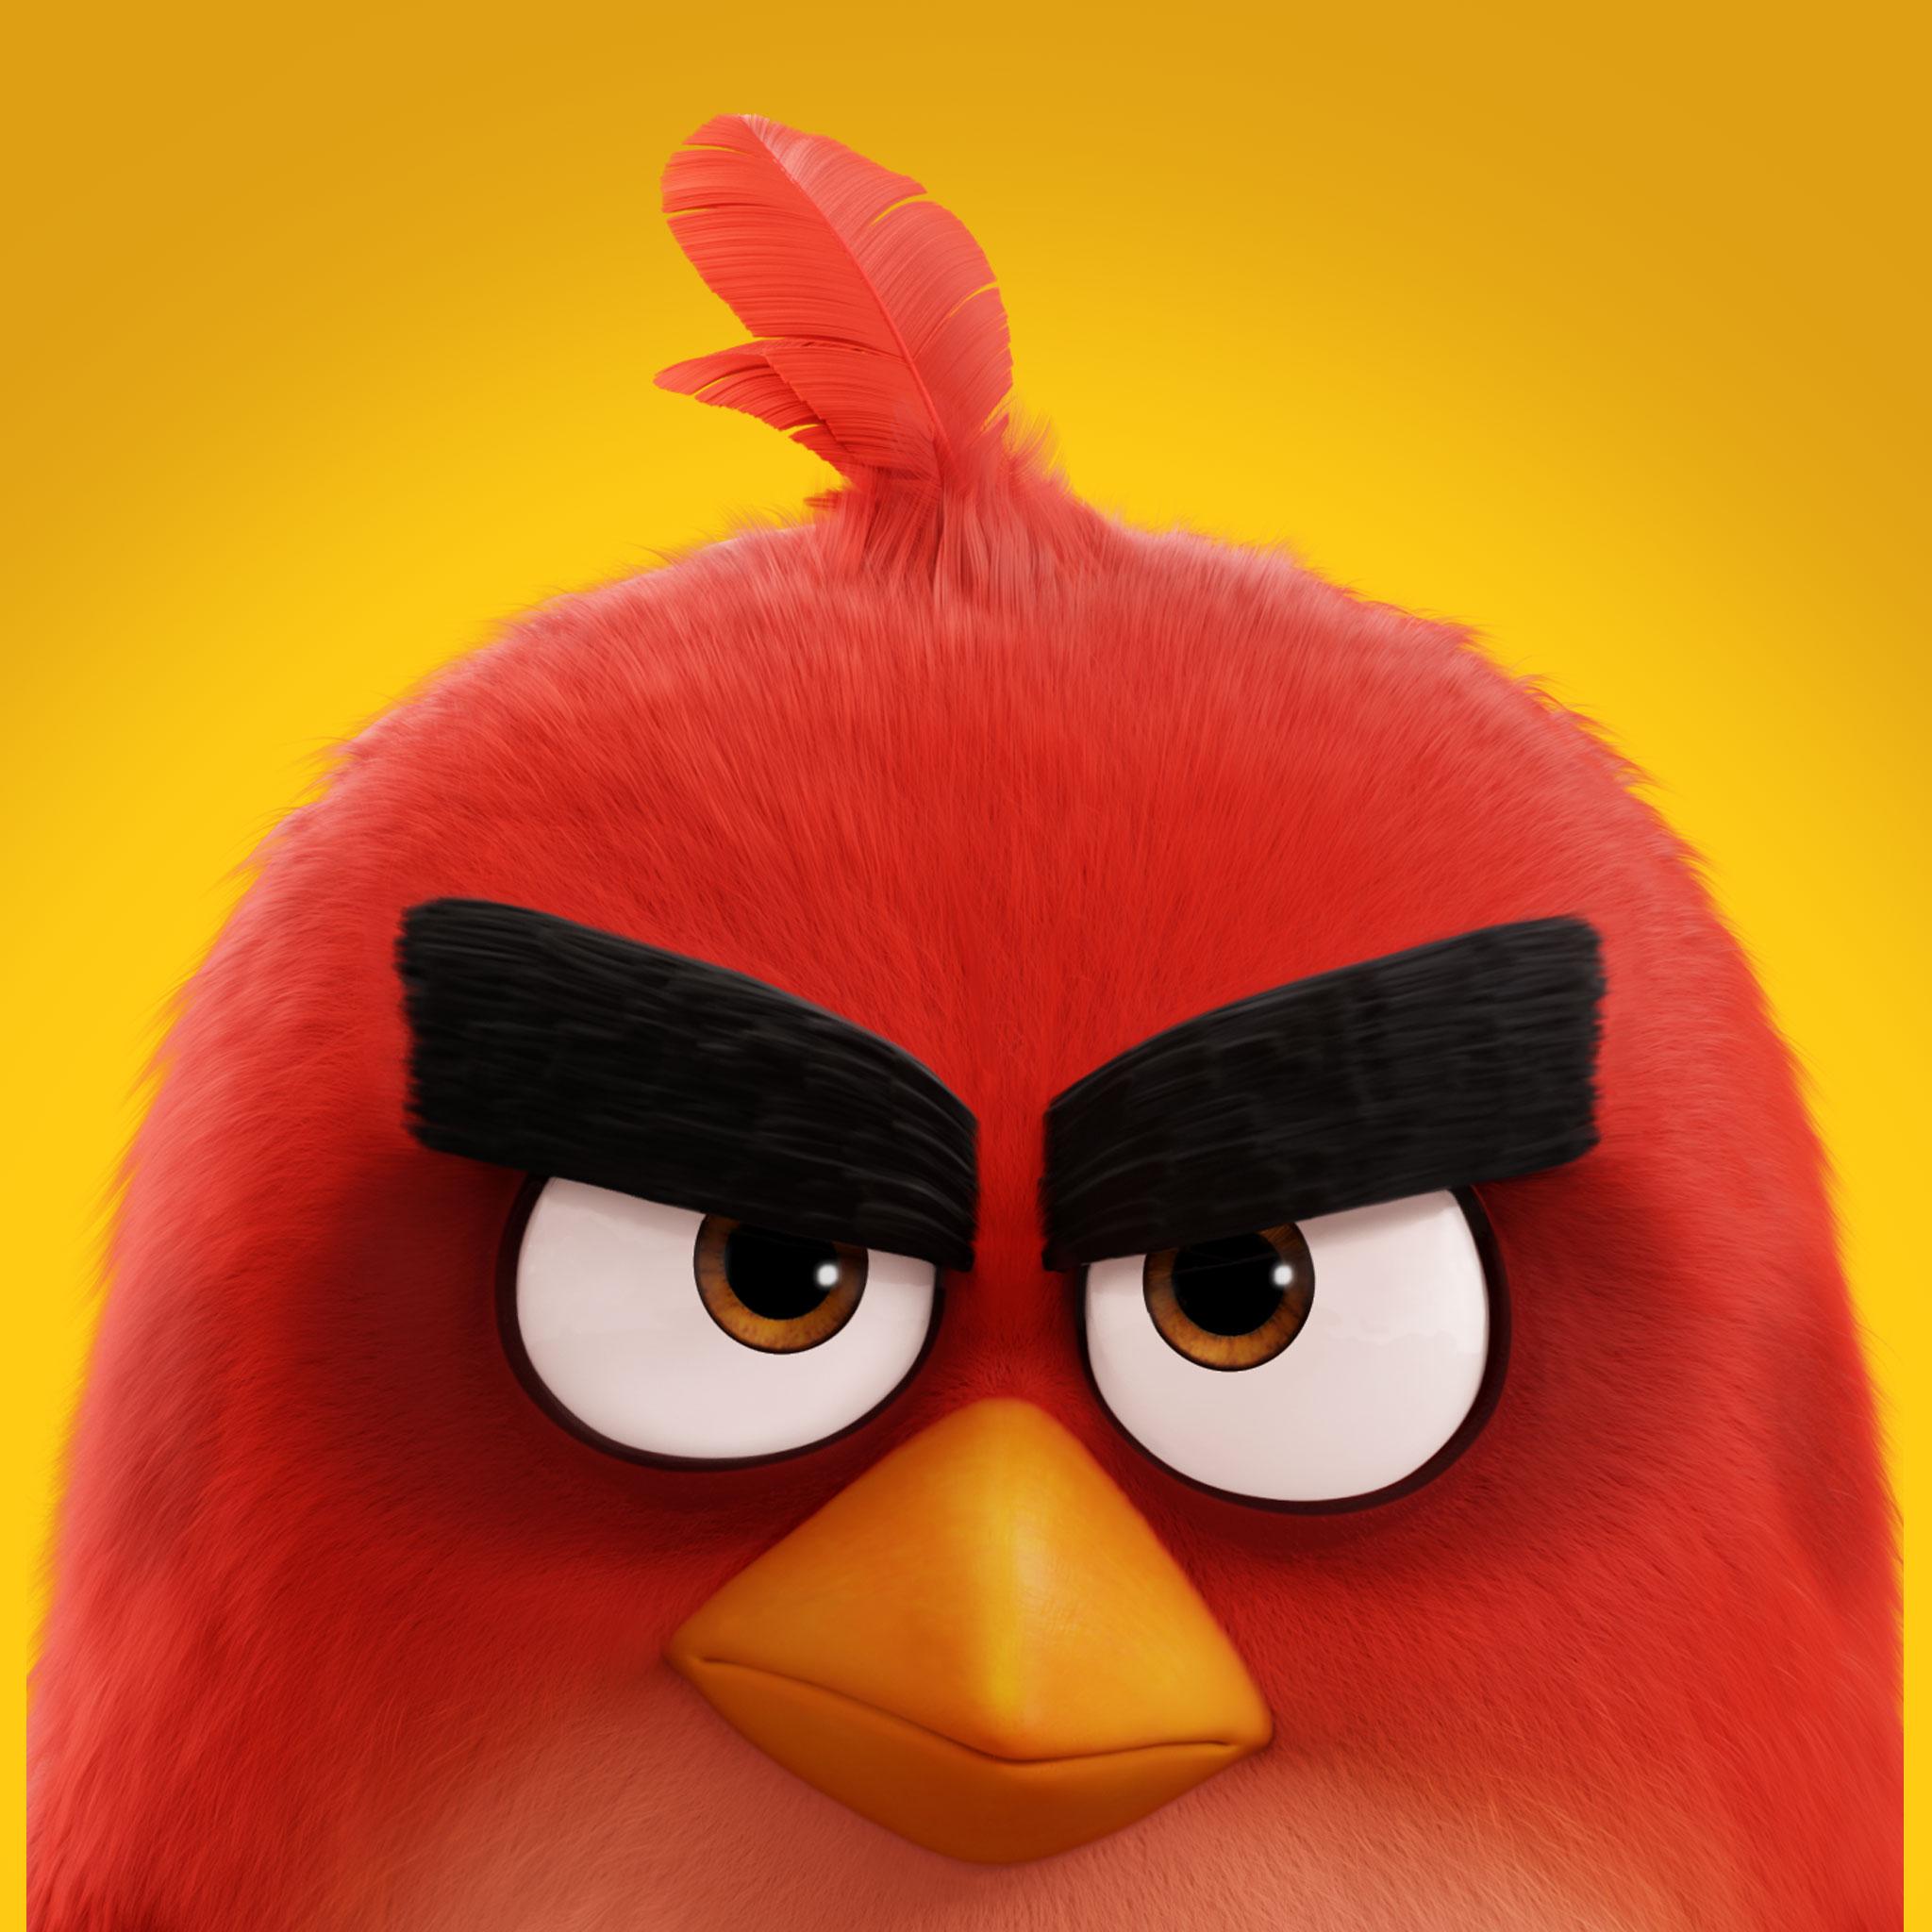 Red Angry Bird wallpaper Collection